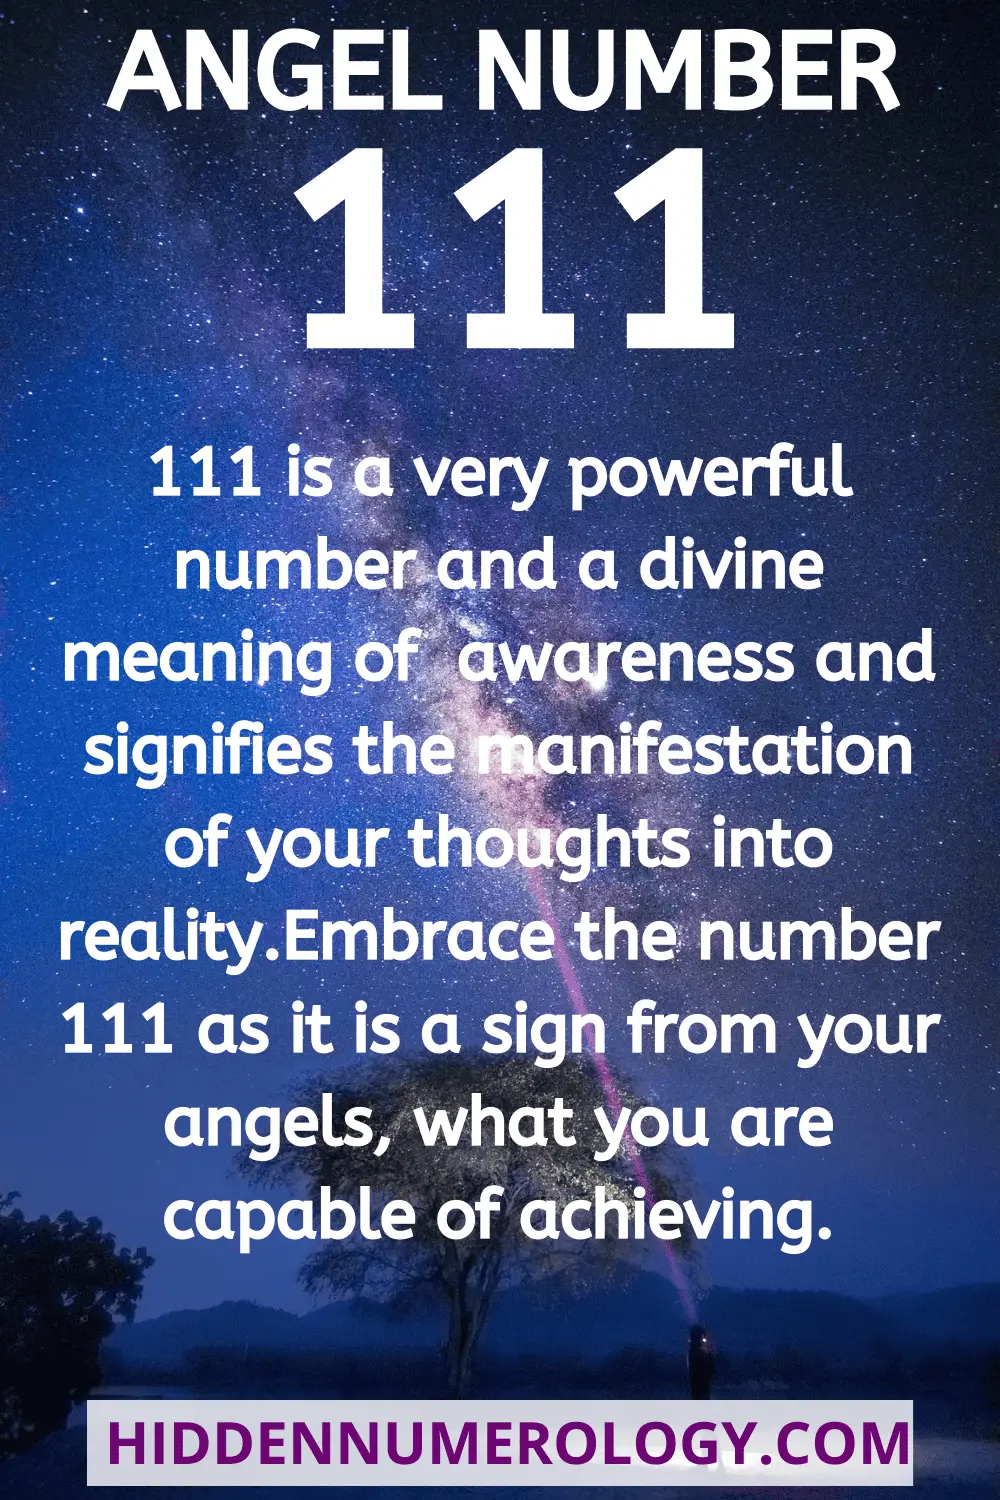 What Is The Meaning Of Angel Number 111?